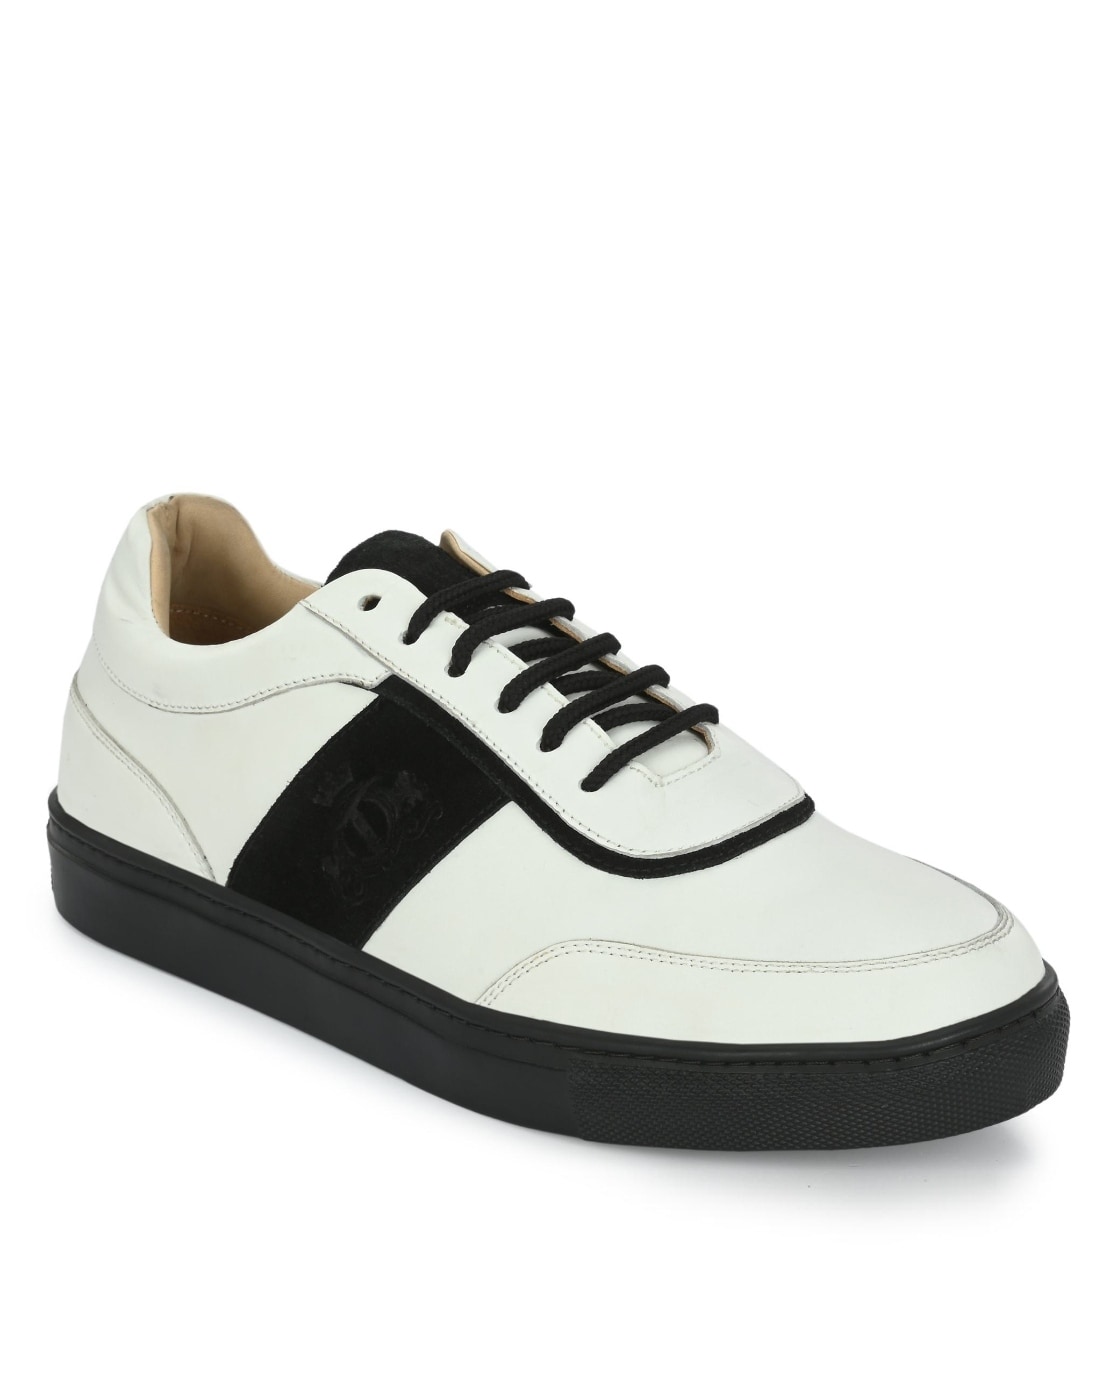 Sparx White Sneakers for Men: Best Sparx white sneakers for men: Step into  style and comfort today - The Economic Times